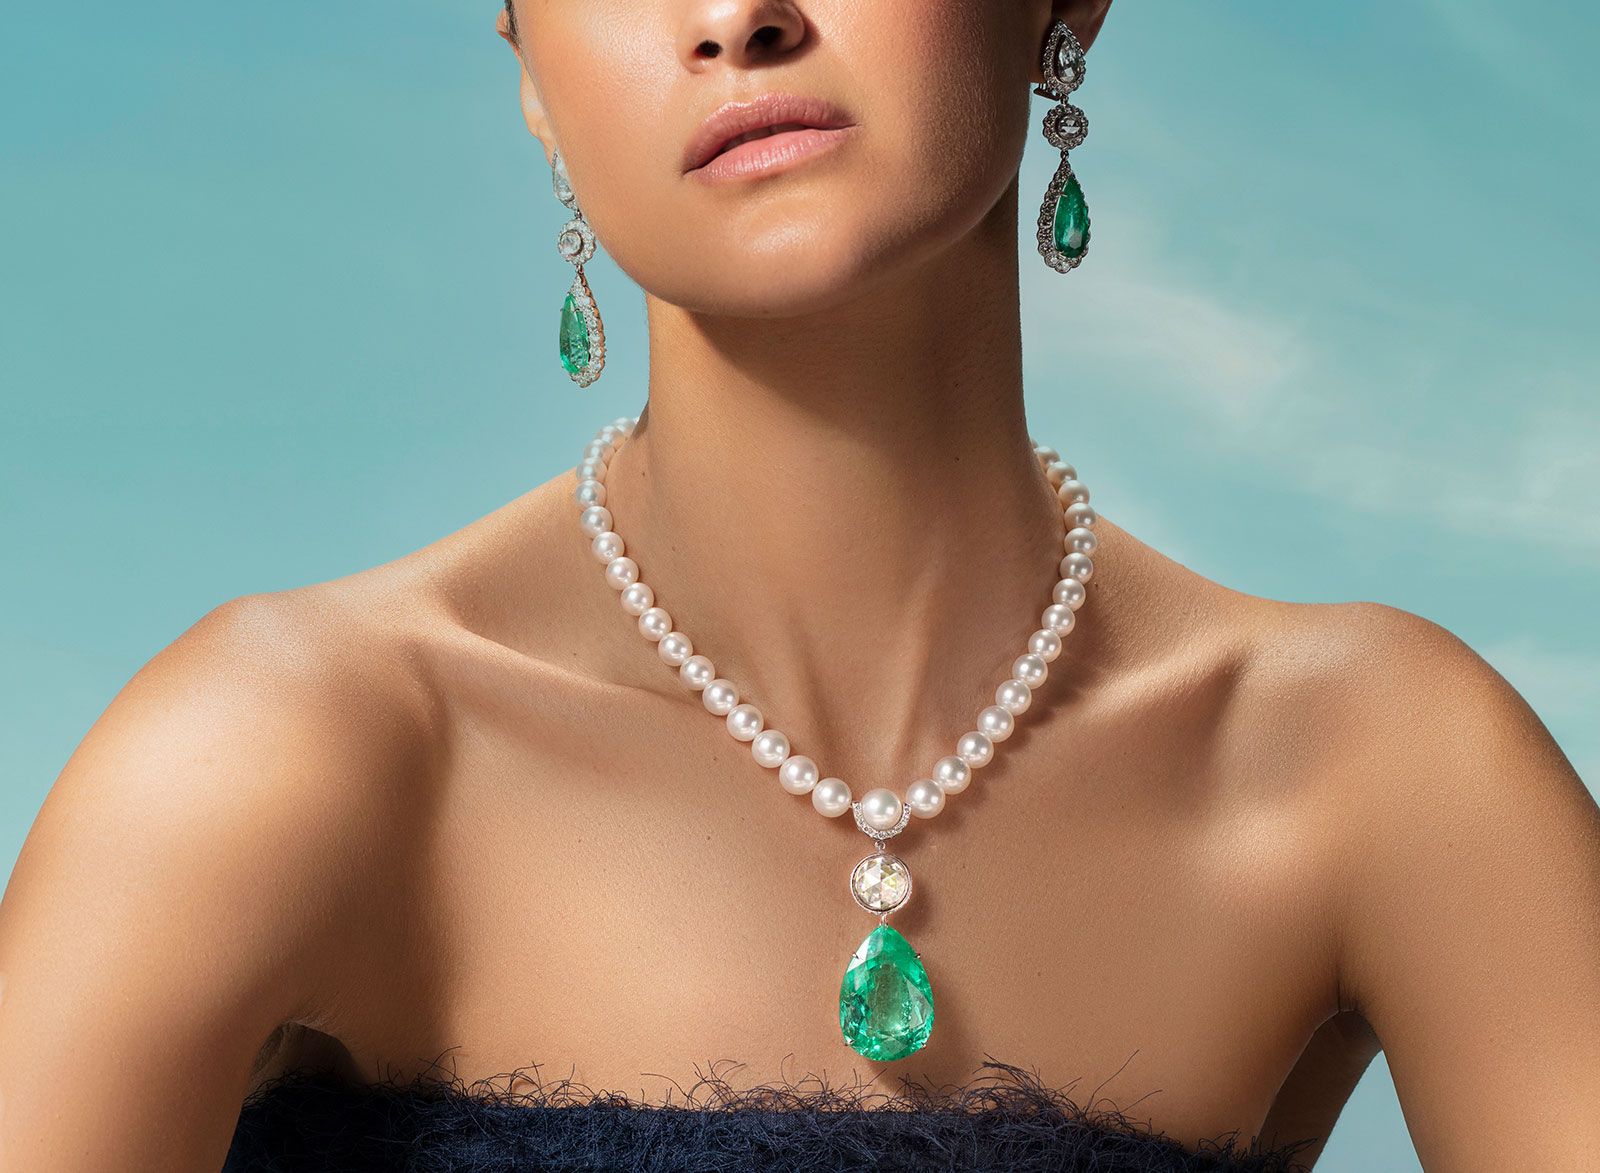 Alok Lodha necklace with a 87.51-carat Colombian emerald and 4.65 cts rose-cut diamond suspended from a string of pearls